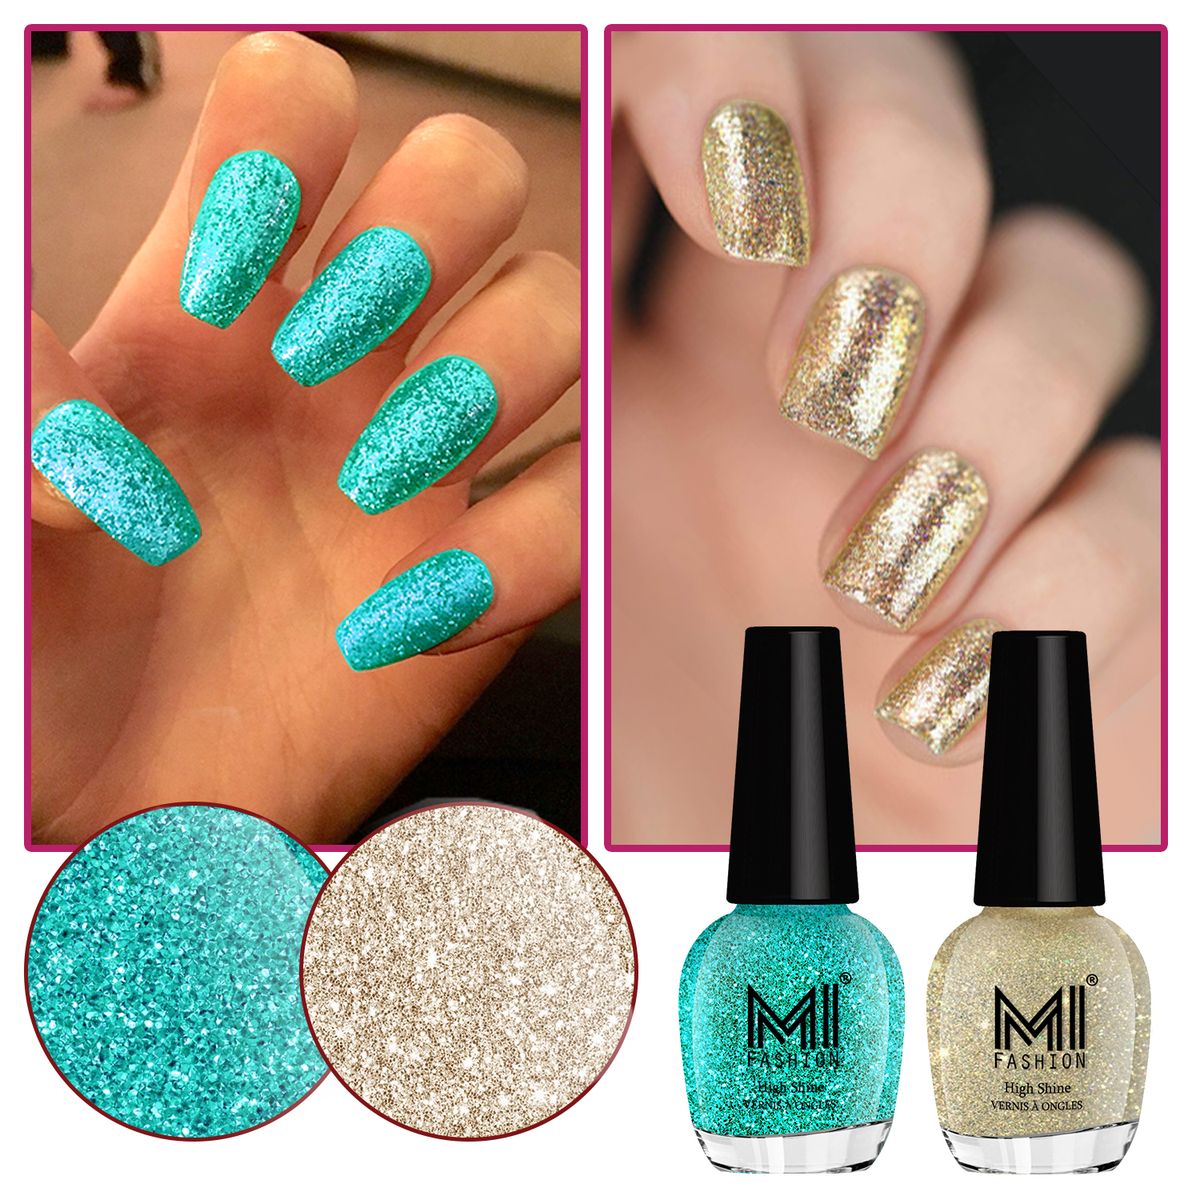 Out of Sequins Reflective Nail Polish Topper By KBShimmer